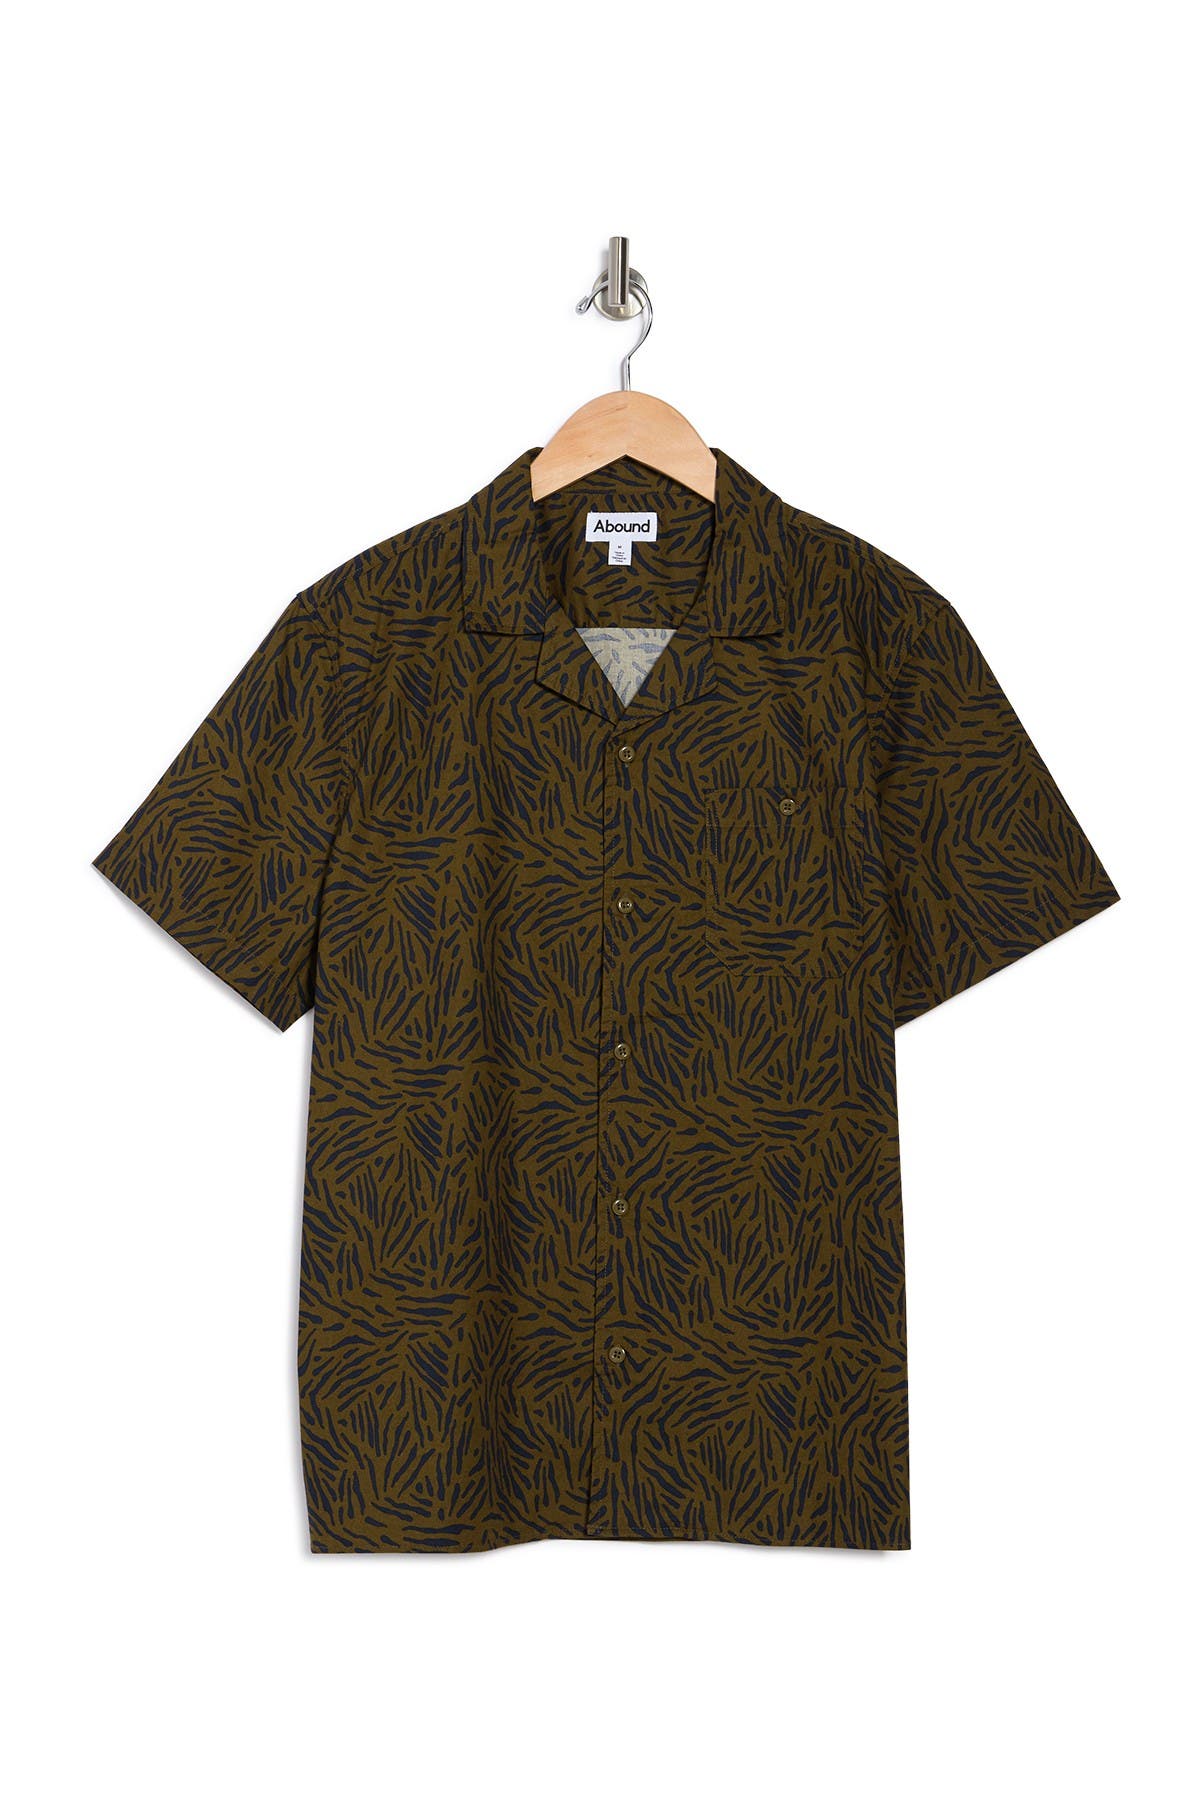 Abound Printed Short Sleeve Regular Fit Camp Shirt In Olive Dark Abstract Marks